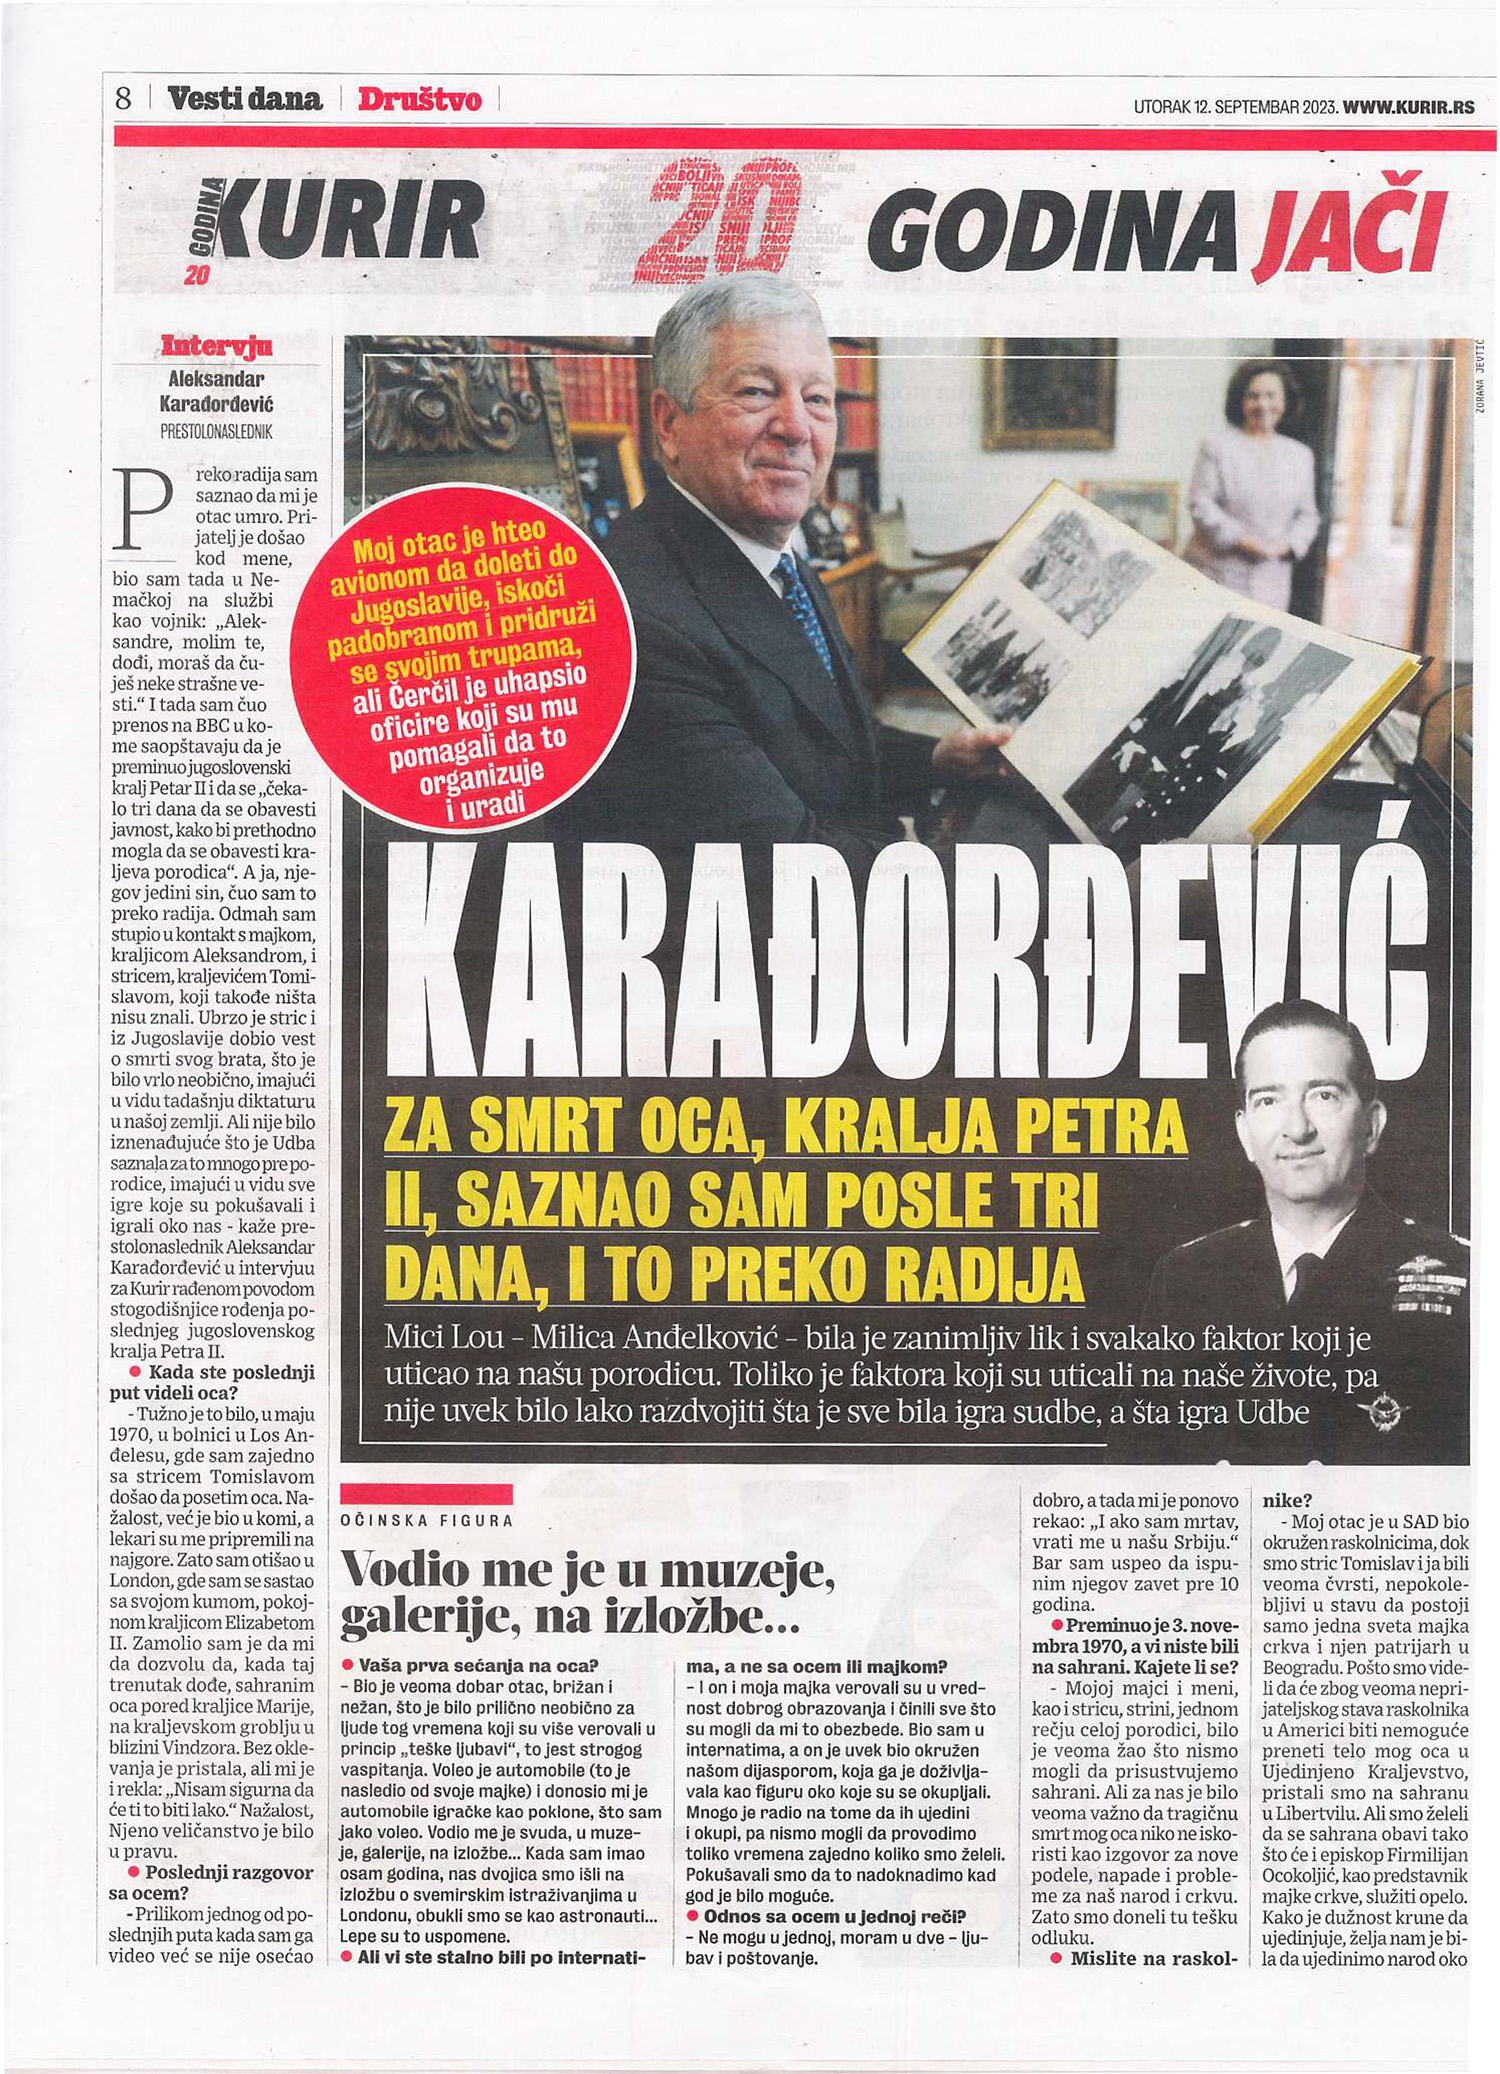 CROWN PRINCE’S INTERVIEW FOR KURIR NEWSPAPERS - THE CENTENIAL OF KING PETER II BIRTH